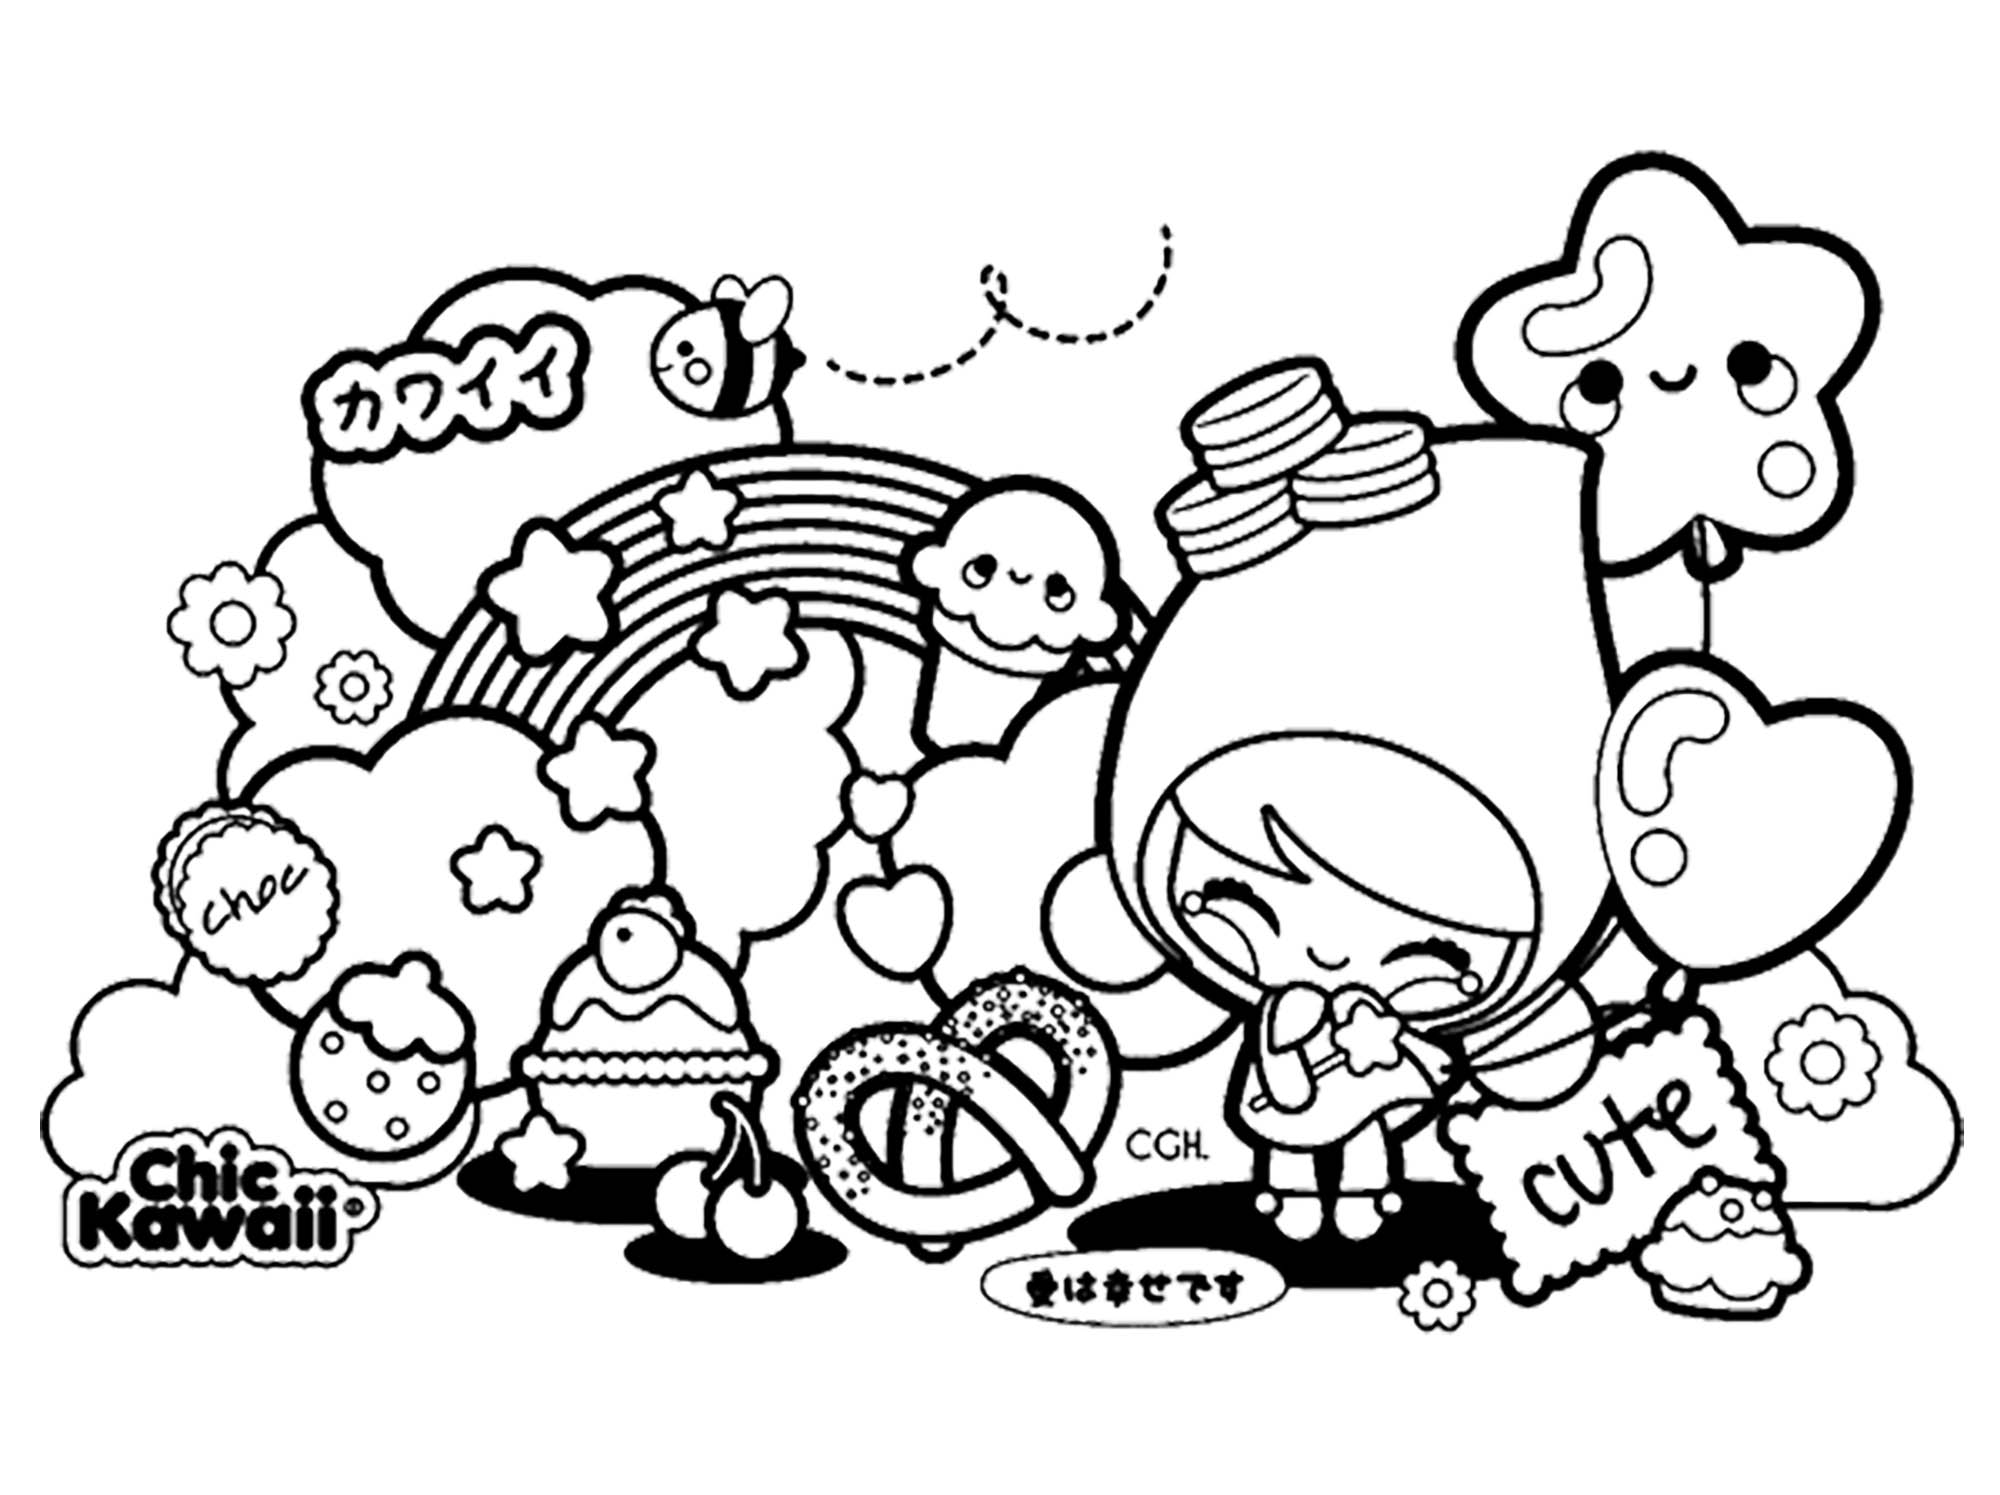 Free Kawaii coloring page to download